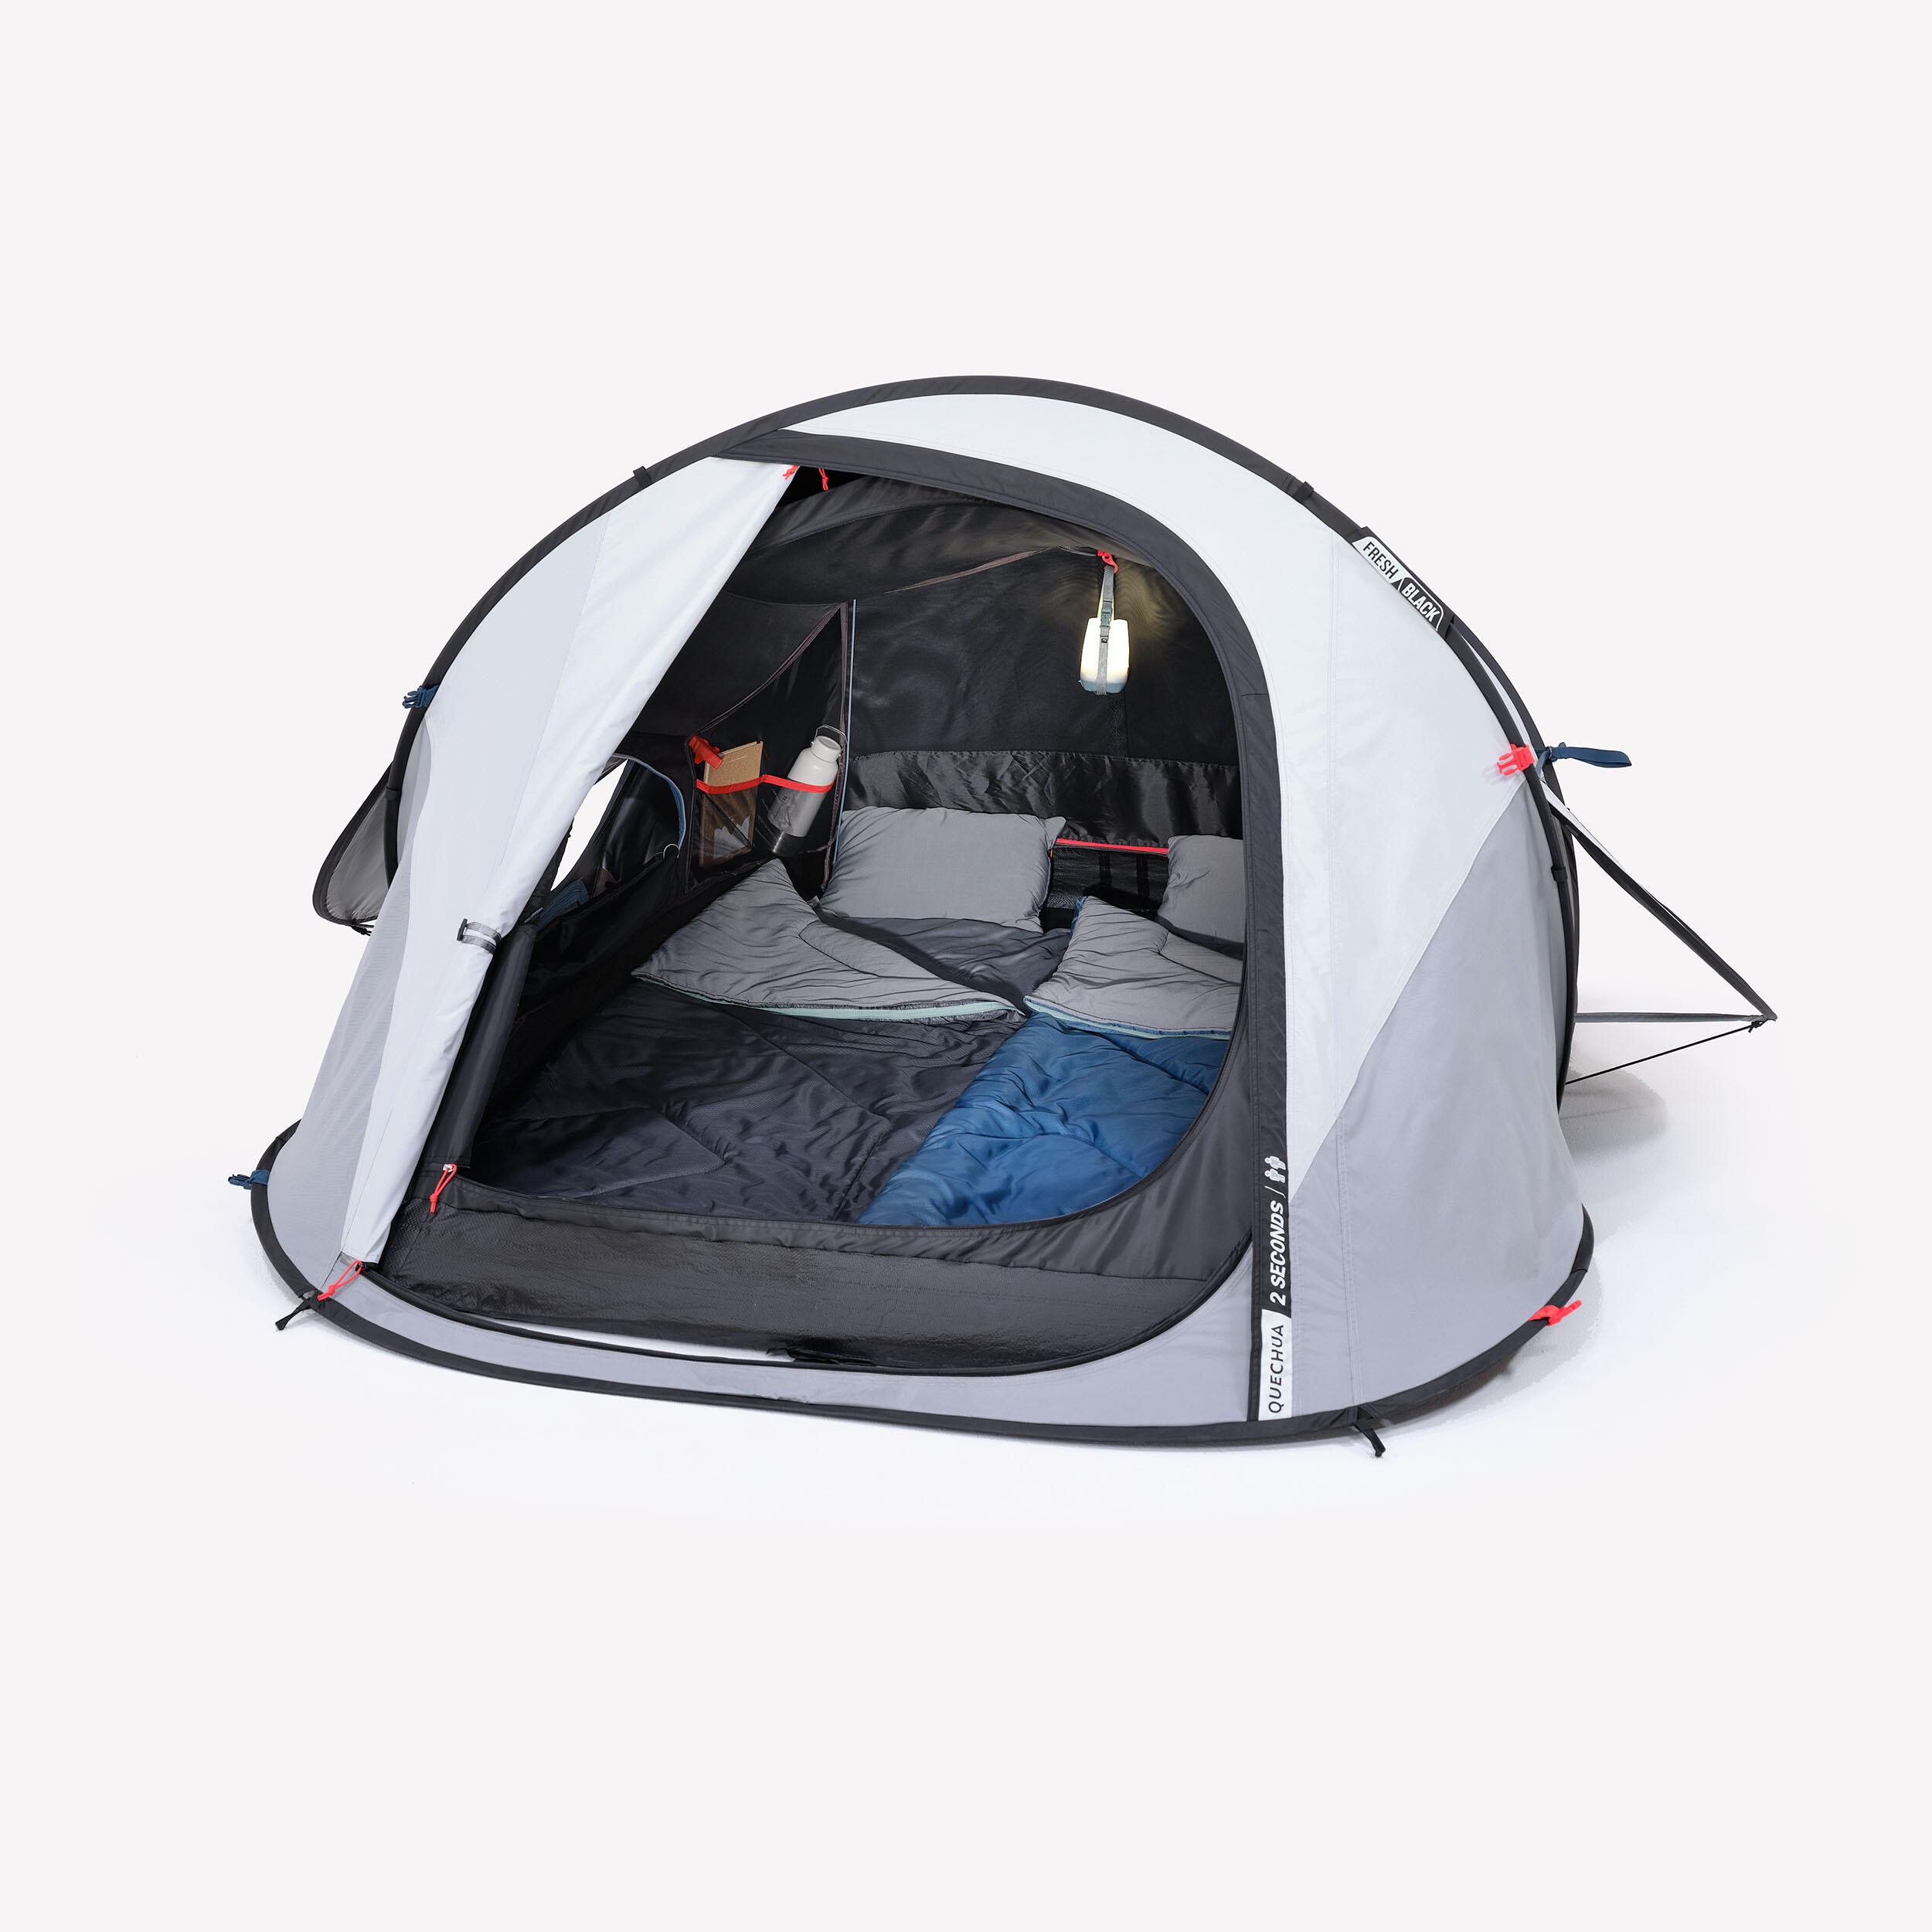 Camping tent 2 Seconds - 2-Person - Fresh&Black 4/15